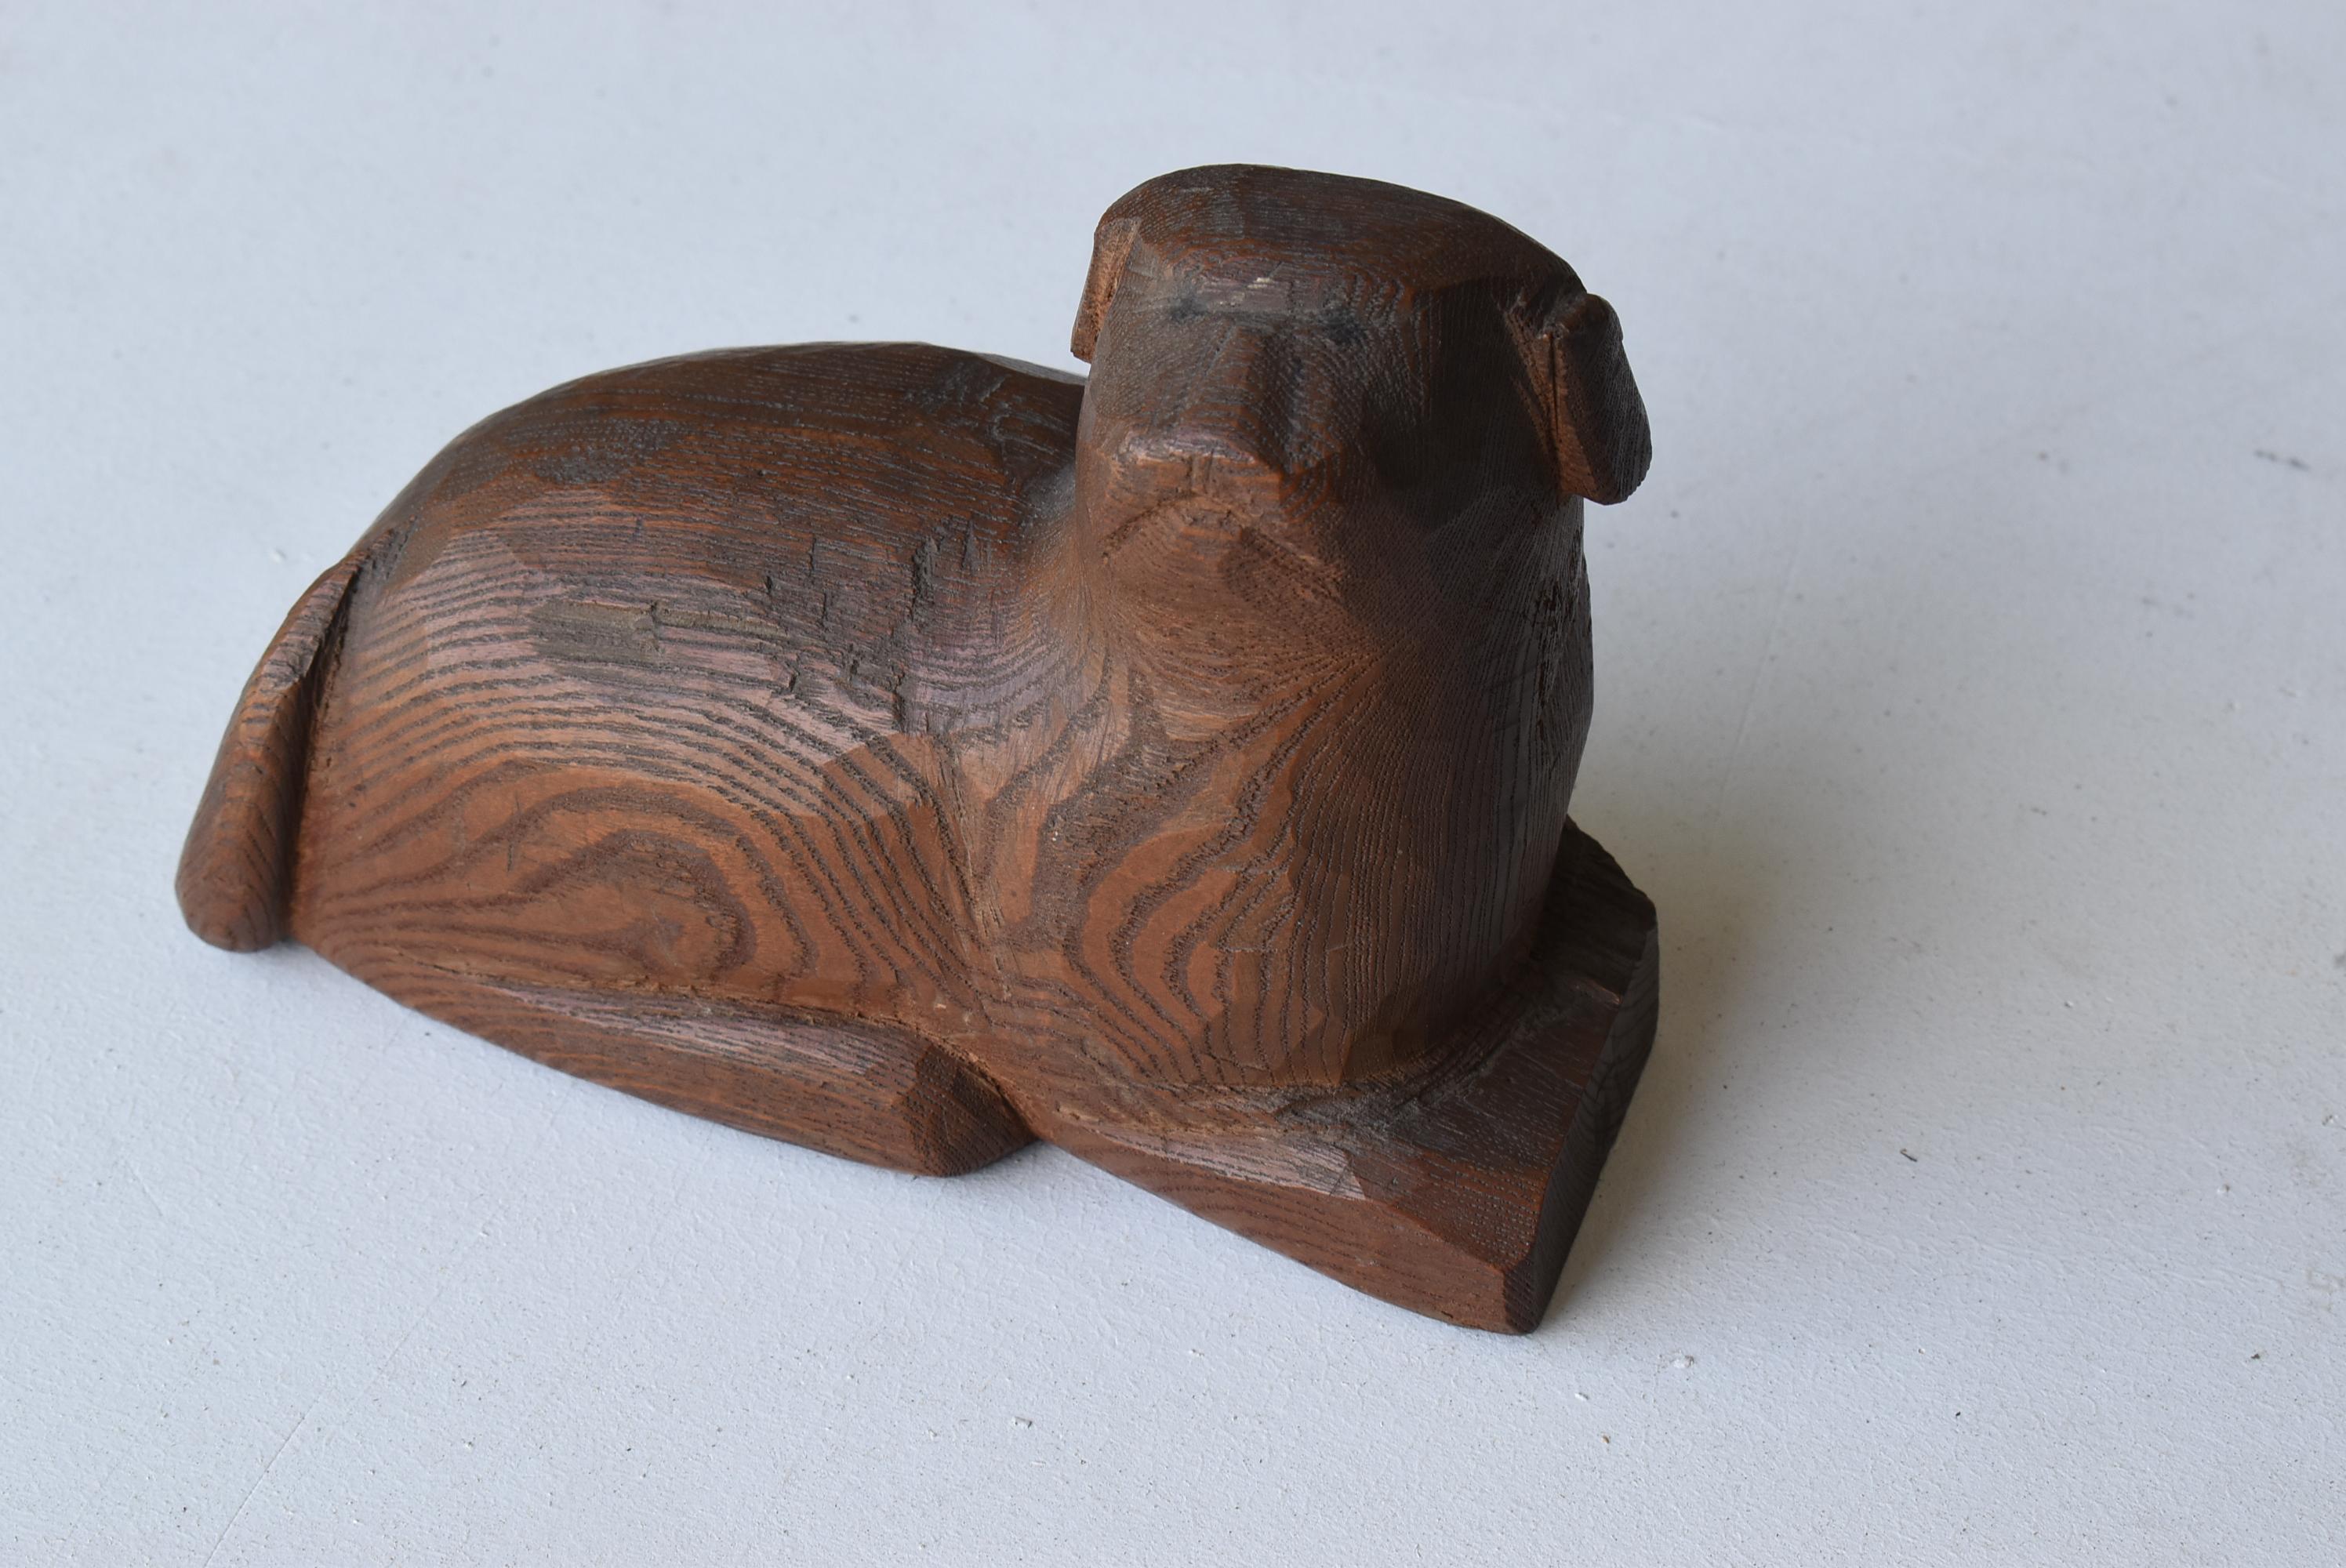 This is an old Japanese wood carving of a dog.
This wood carving is estimated to have been made between 1920 and 1940.
It is carved from zelkova wood.

The artist's name and other details are unknown.

The dog has a lovable expression.
It has an